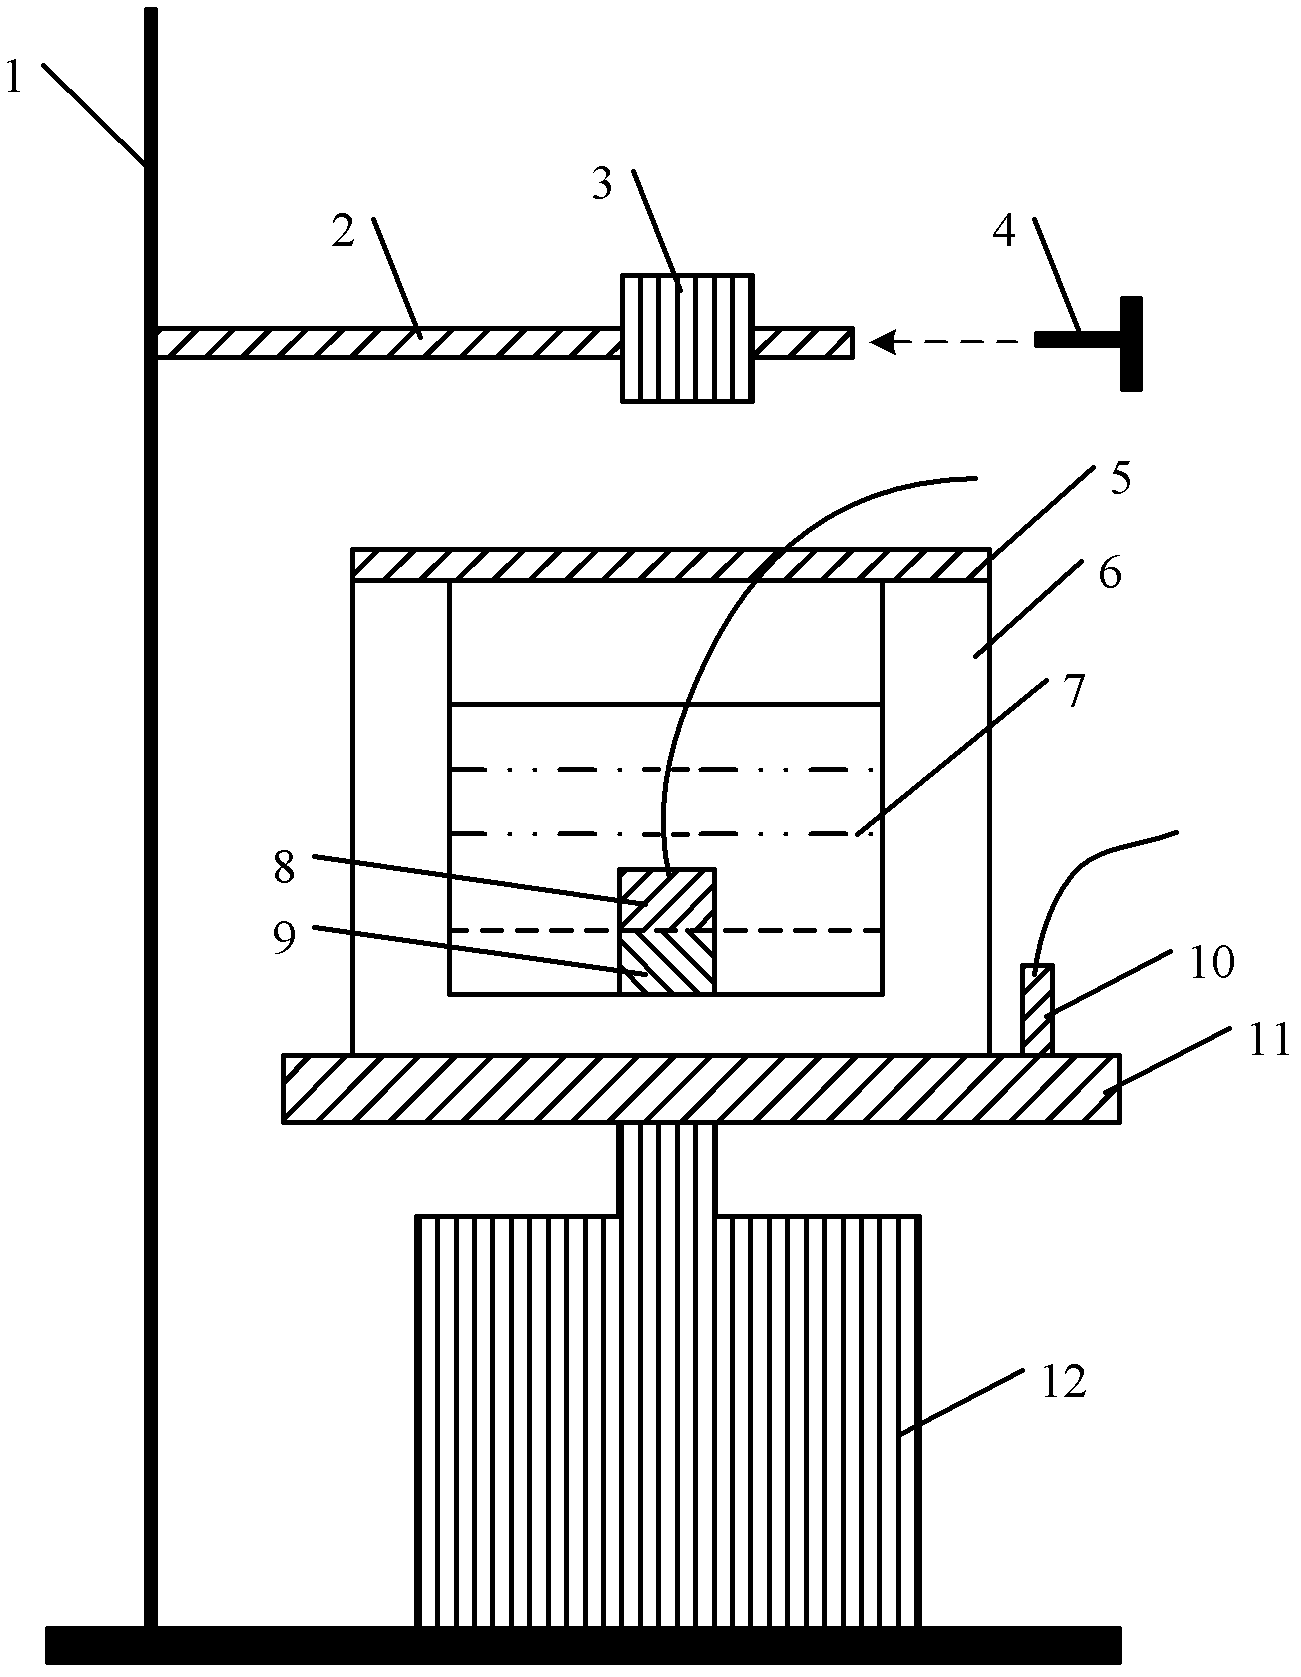 Multi-point testing system for dynamic surface magnetic field and thermal distribution of superconductor